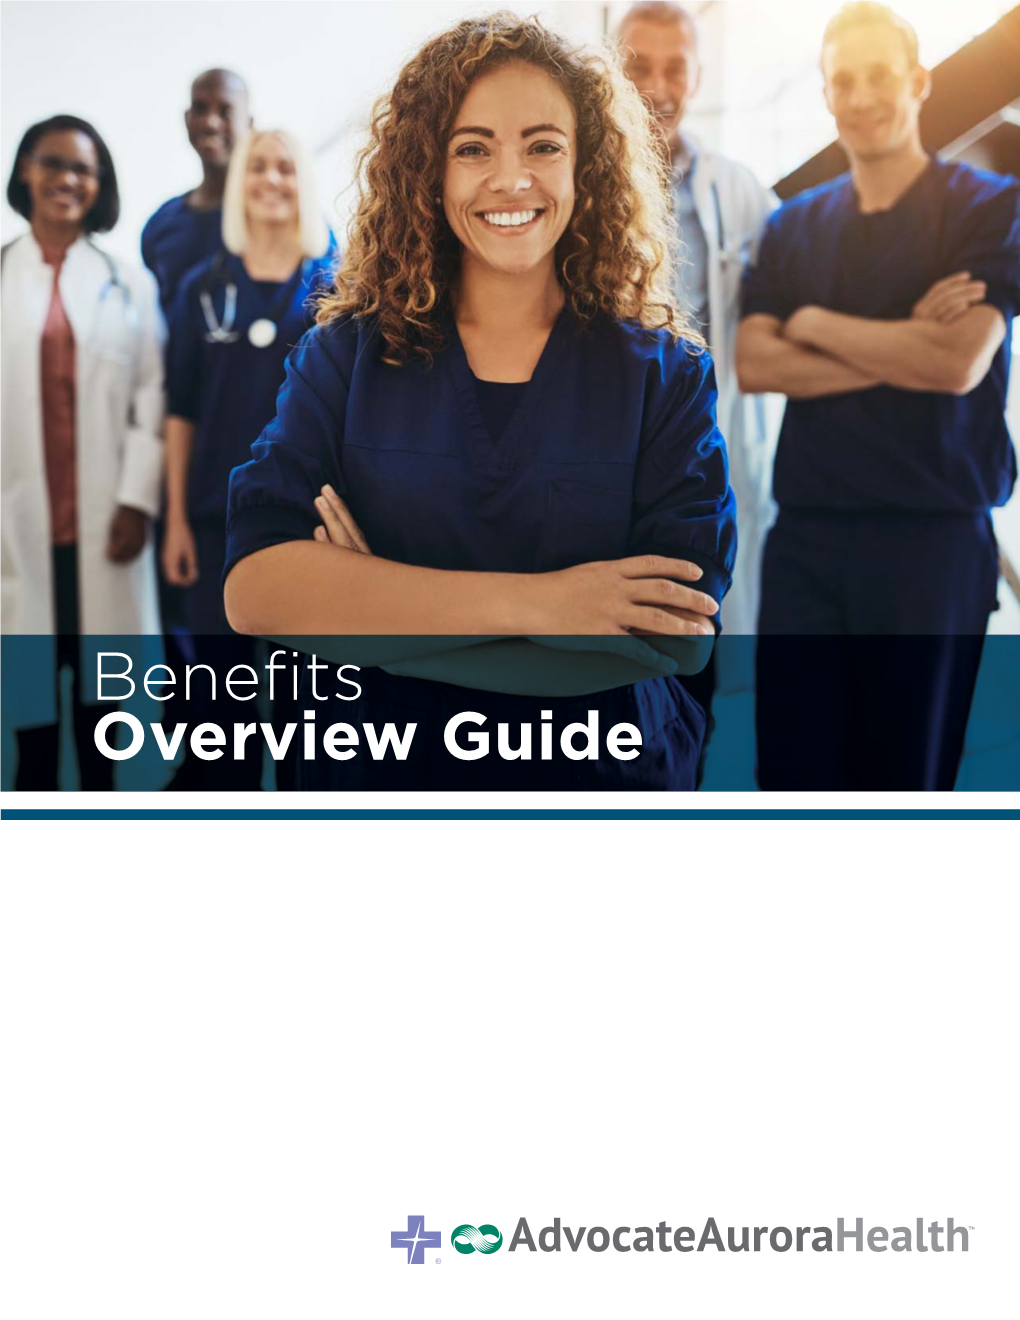 Benefits Overview Guide